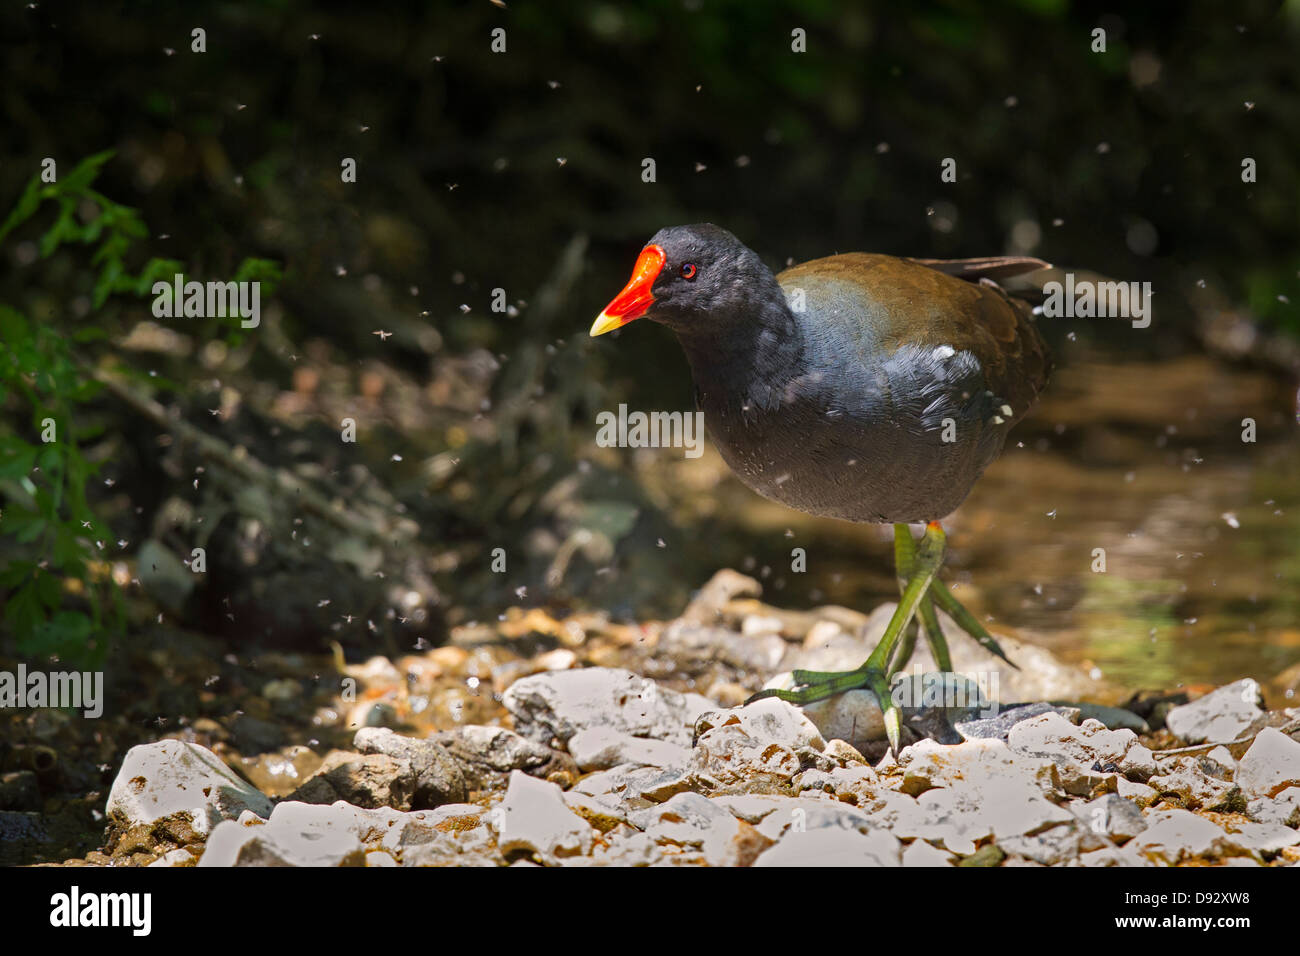 Moorhen surrounded by insects Stock Photo